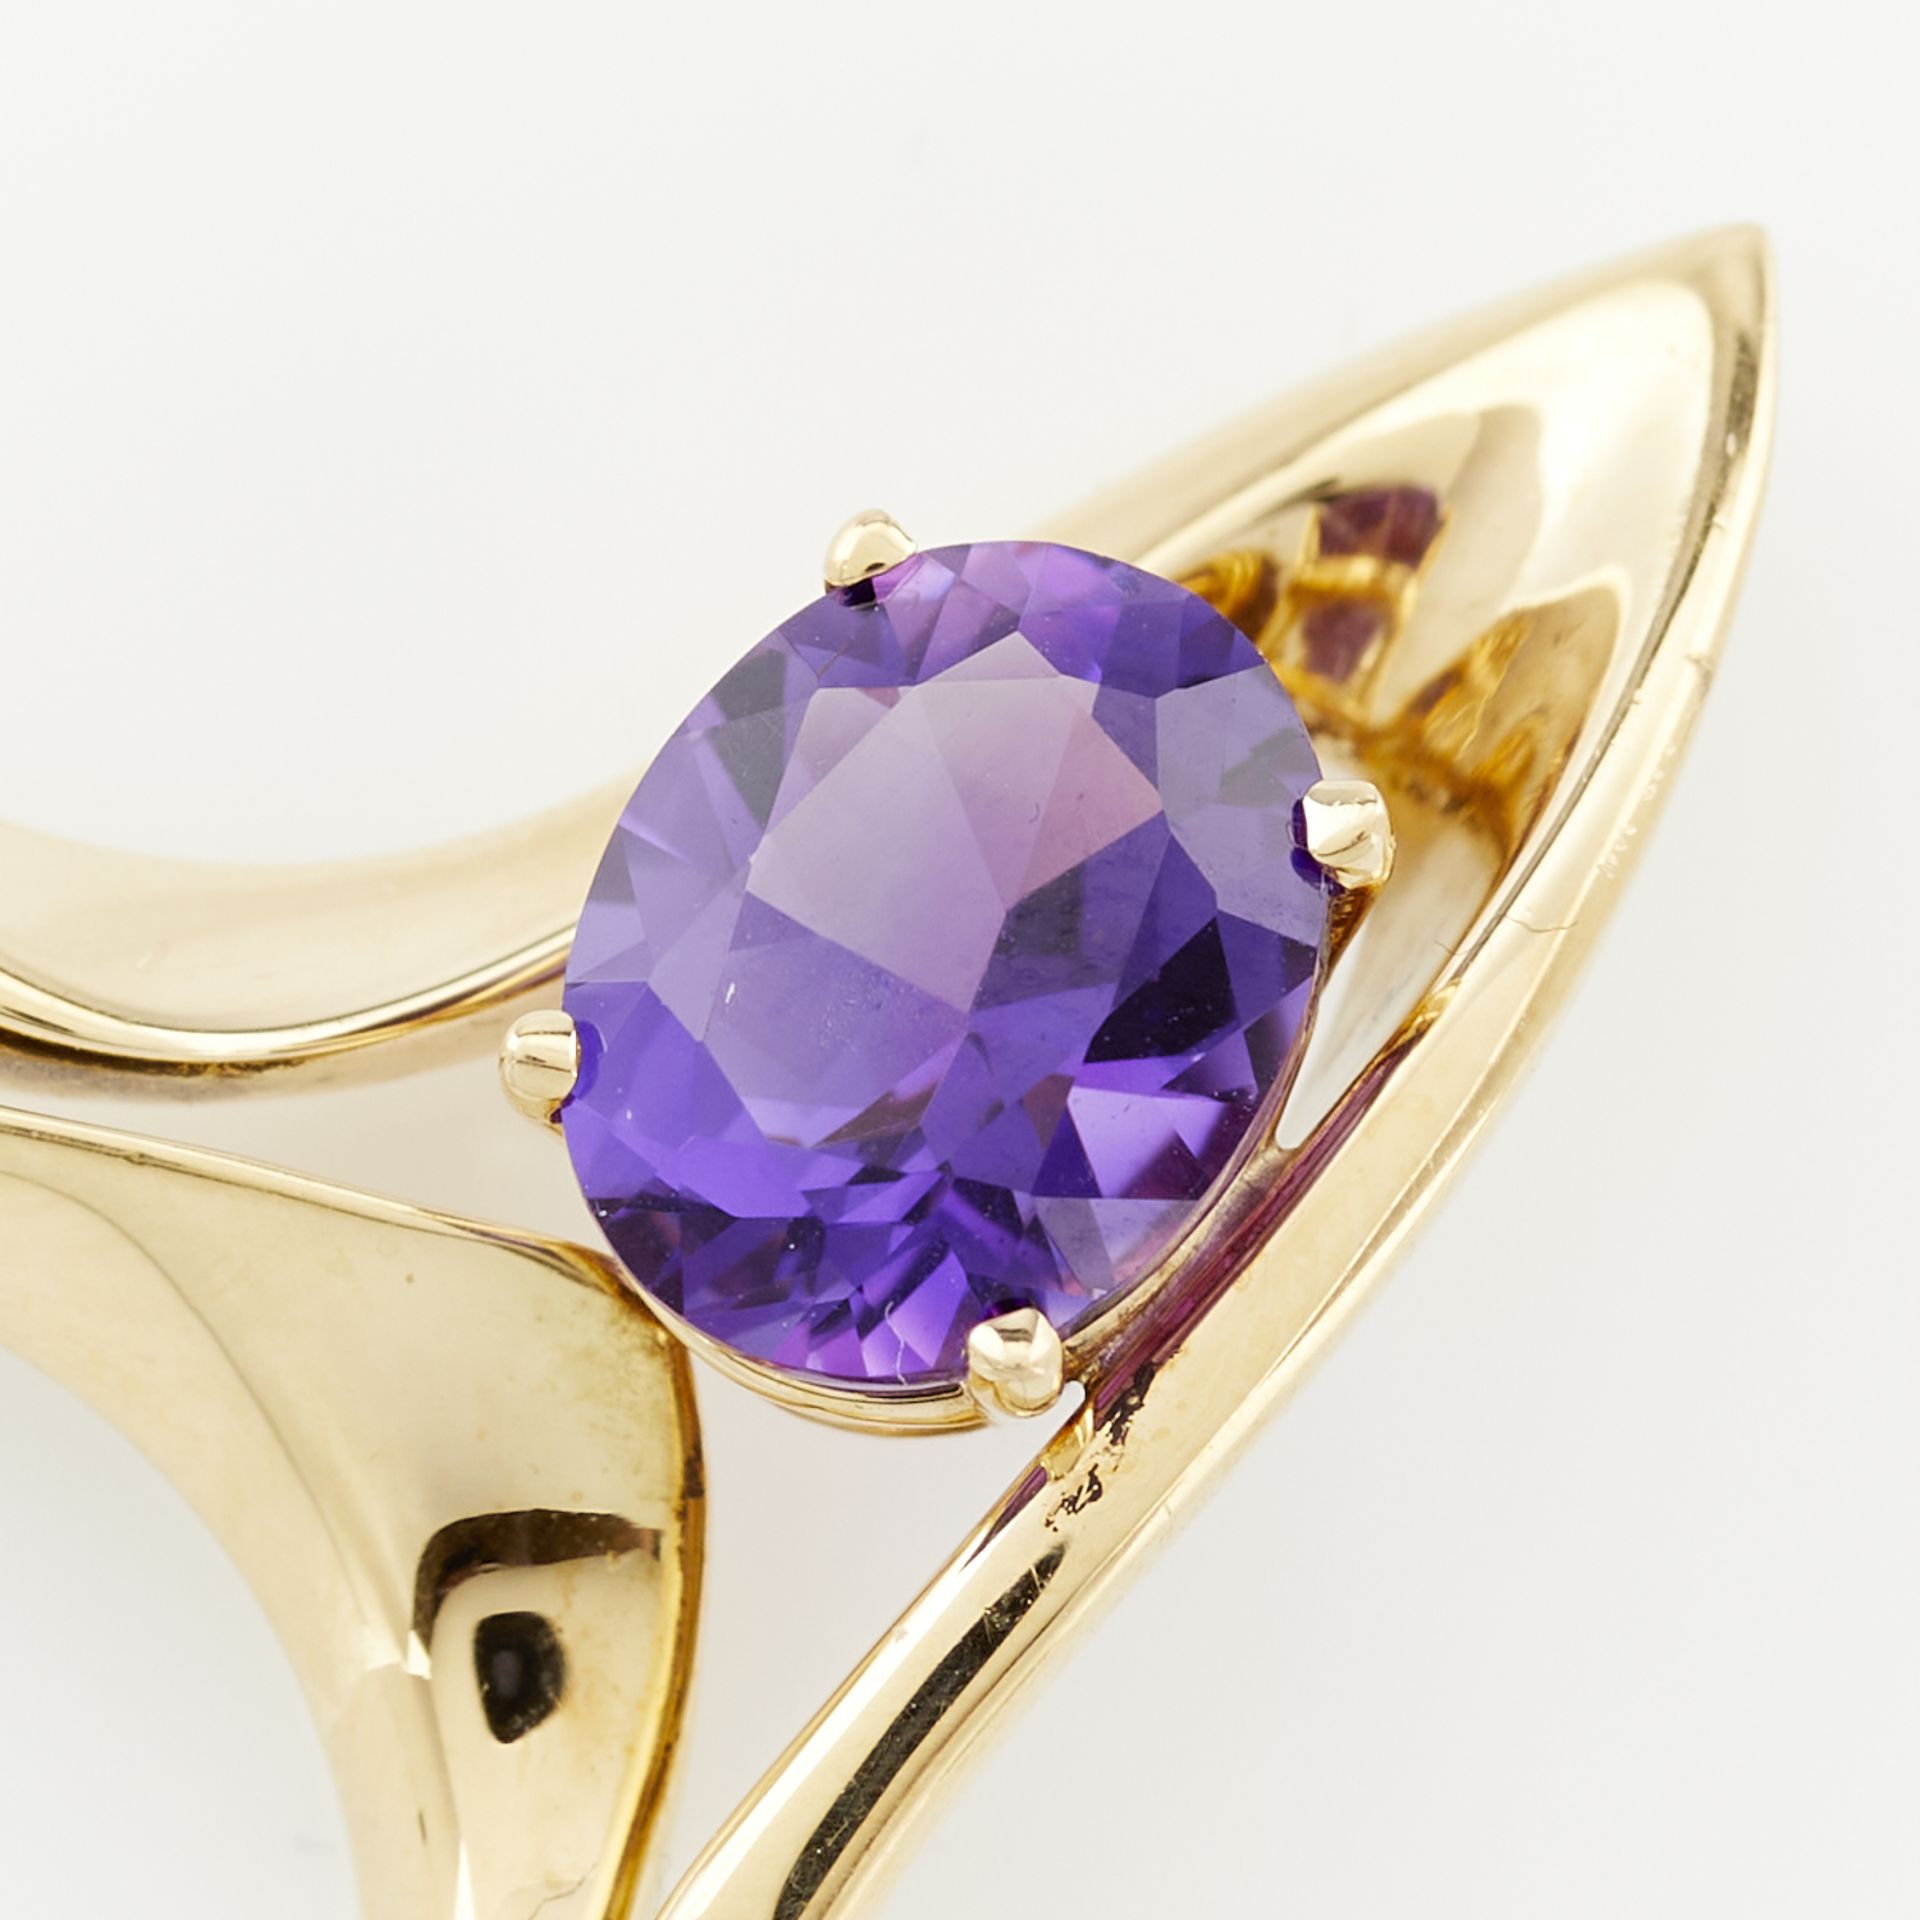 18k Gold Pendant with Amethyst & Citrine - Image 4 of 6